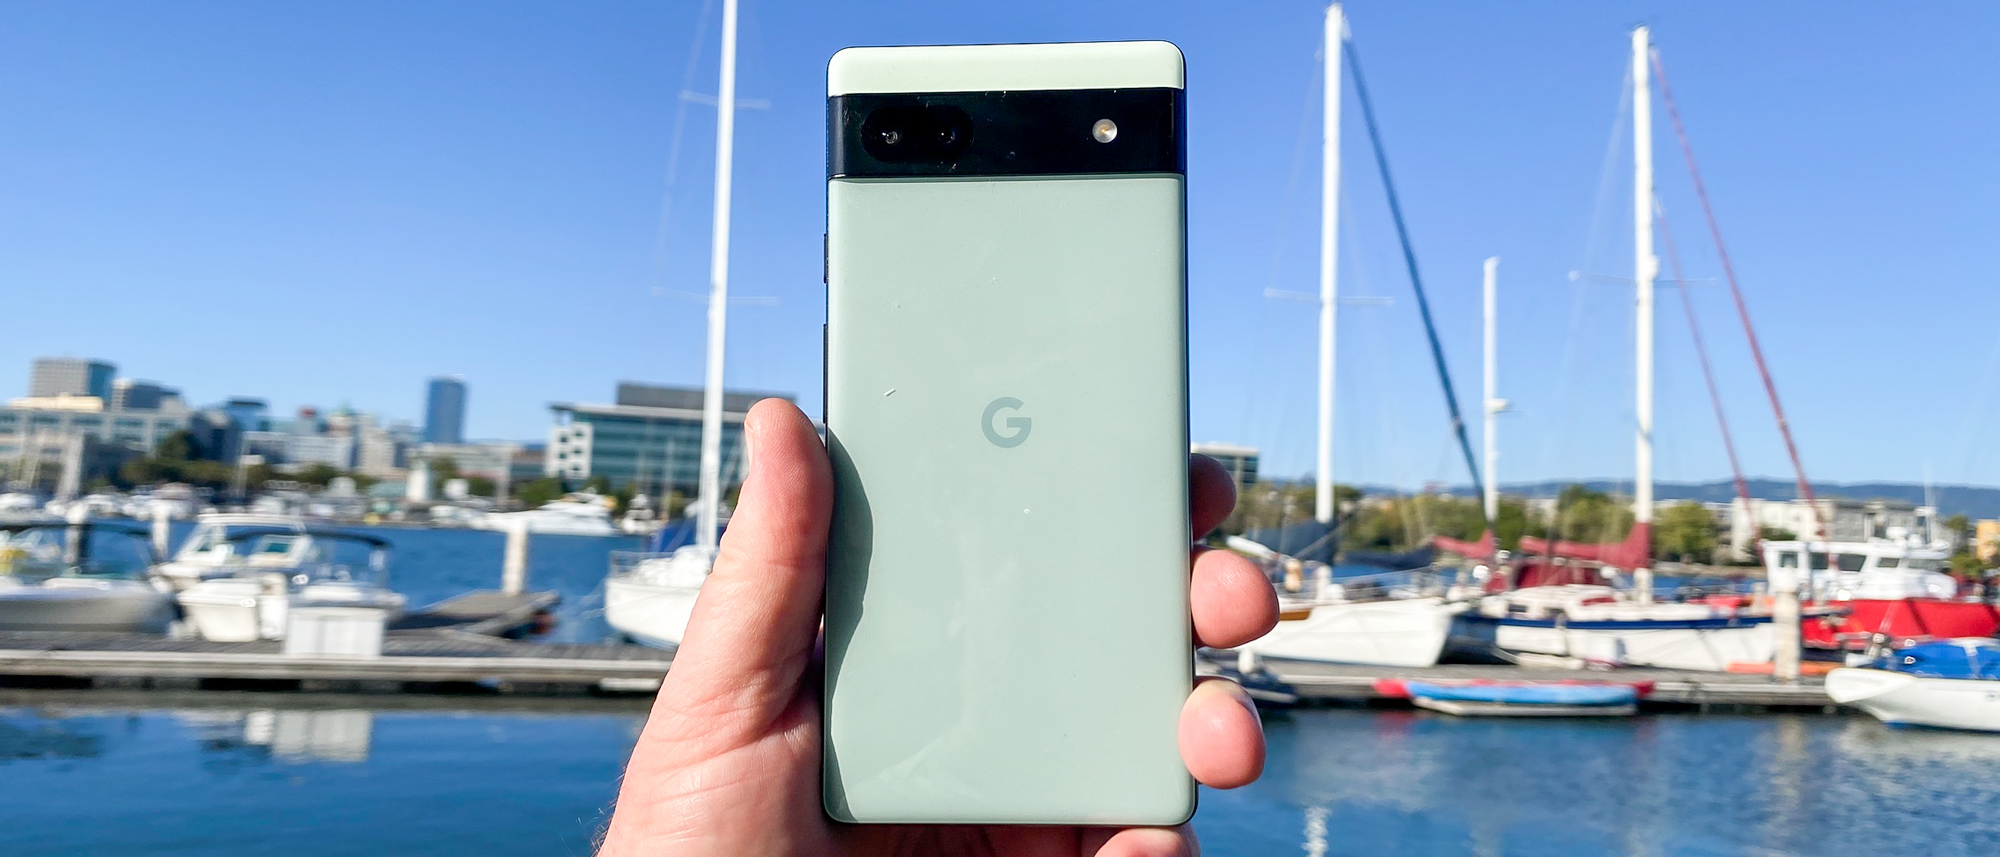 Google Pixel 6a review: The best phone under $500 | Tom's Guide